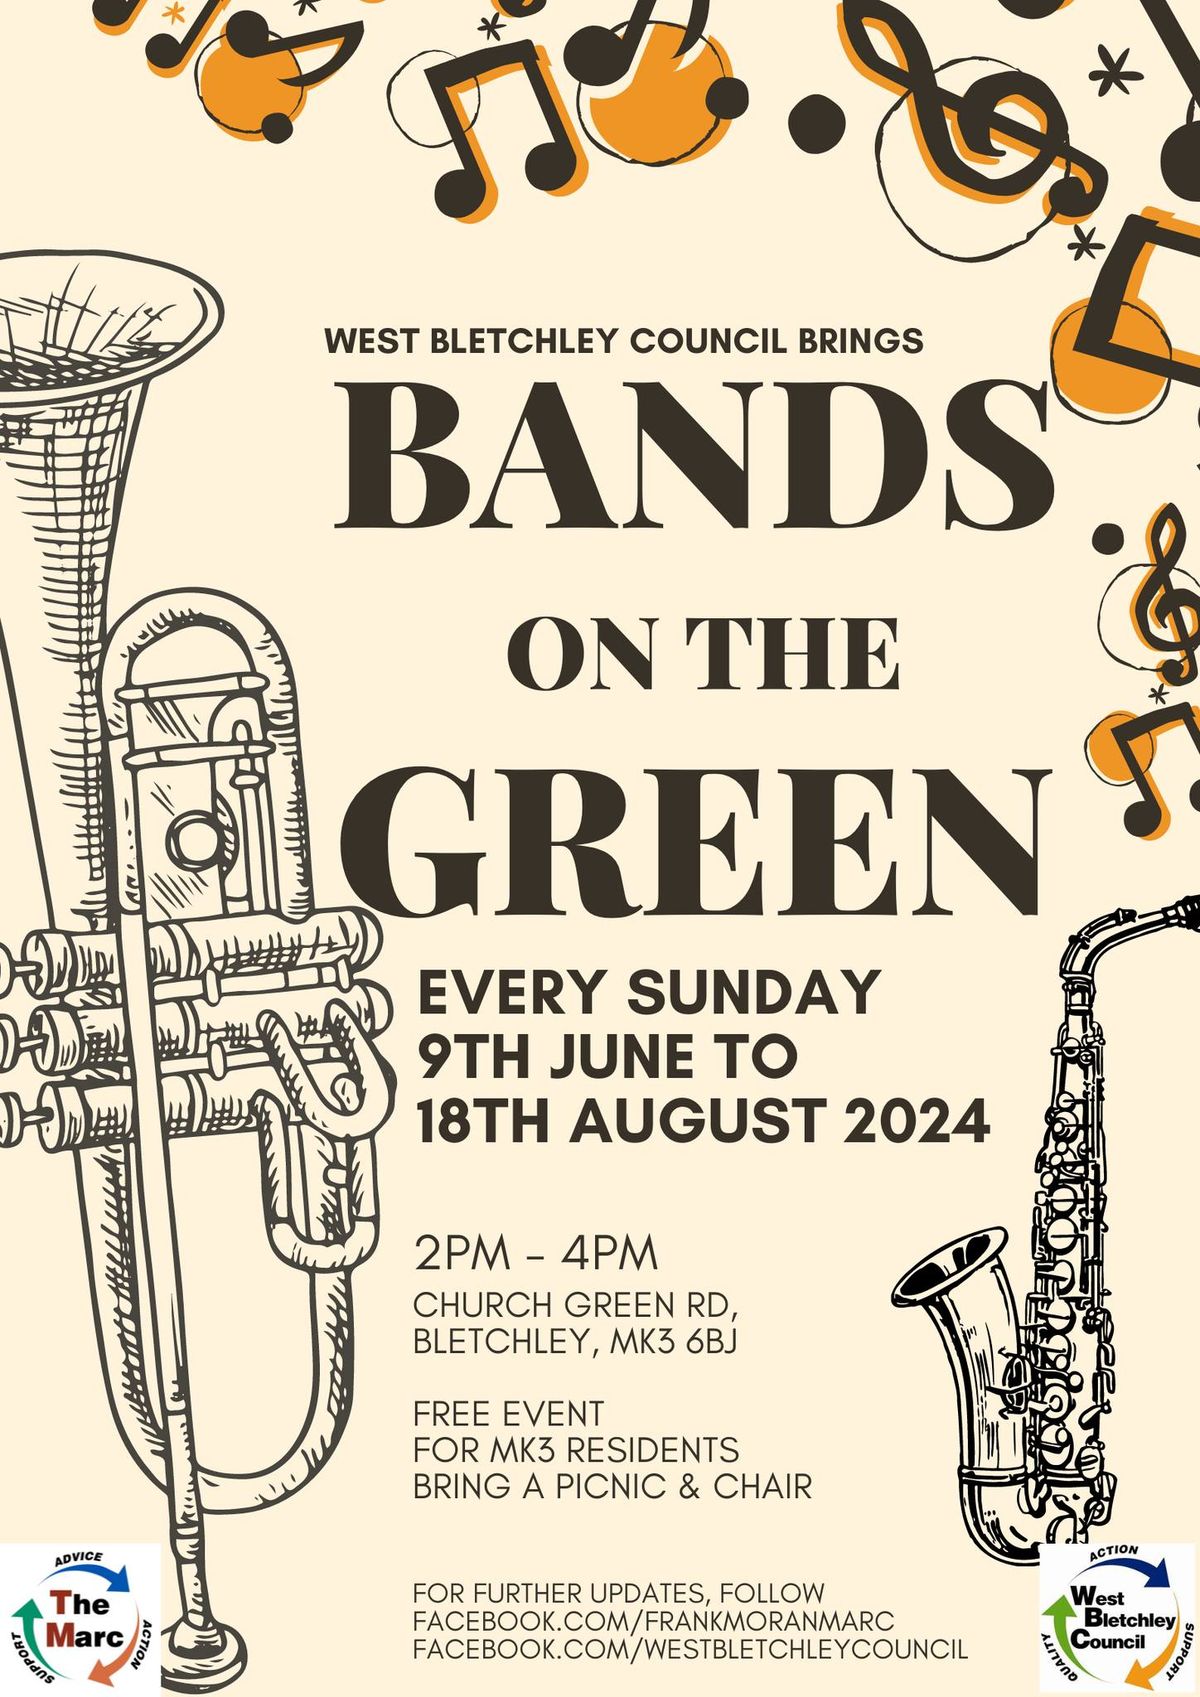 West Bletchley Bands on the Green